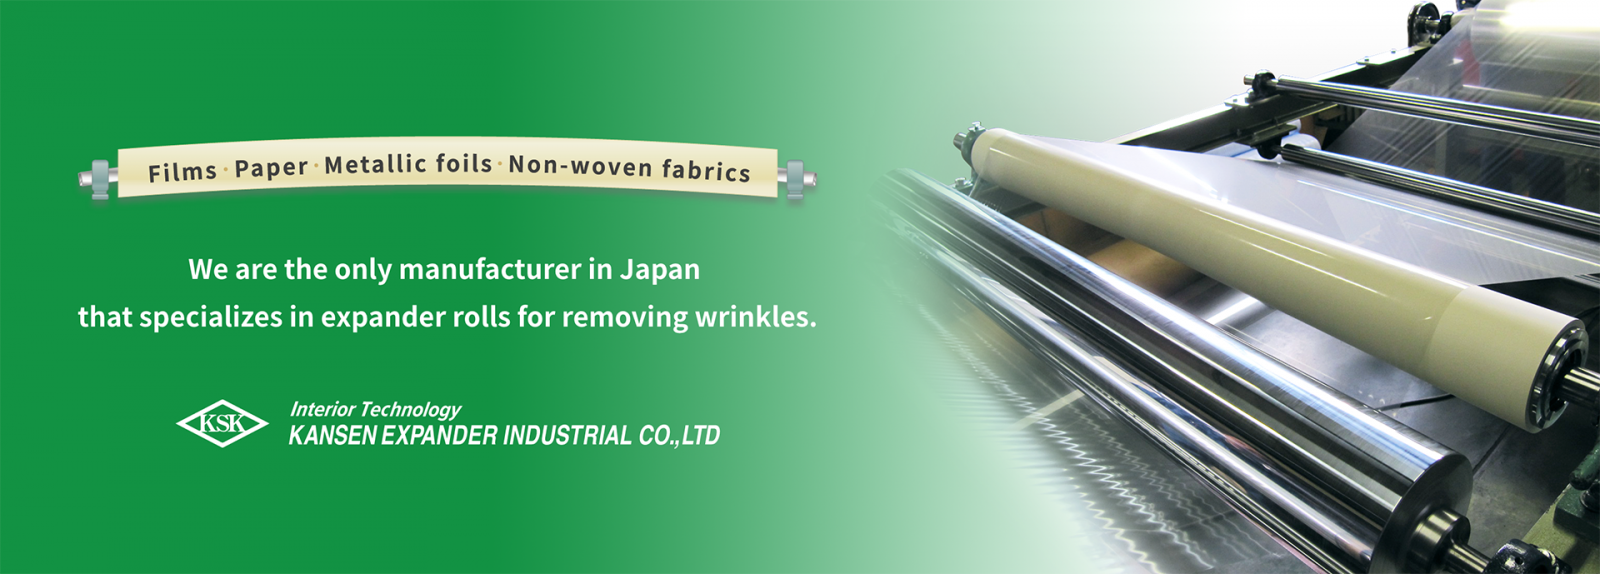 We are the only manufacturer in Japan that specializes in expander rolls for removing wrinkles